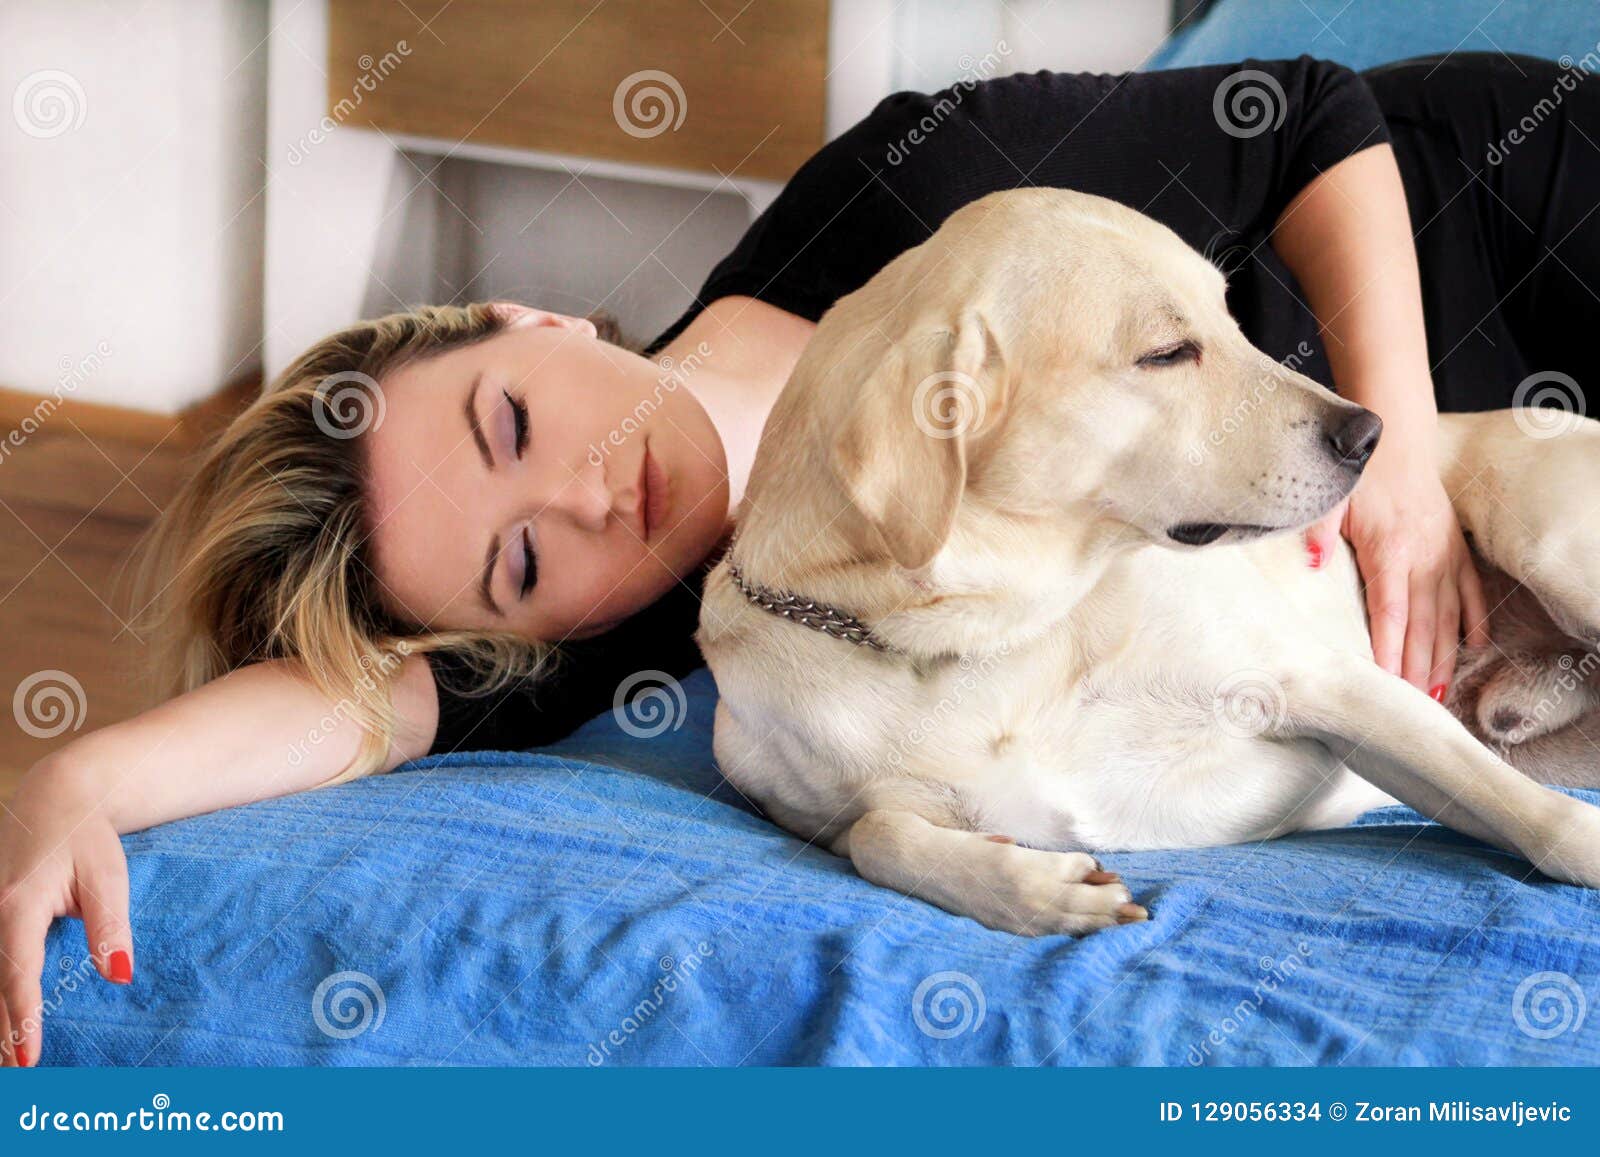 Woman With Cute Dogs At Home Handsome Girl Resting And